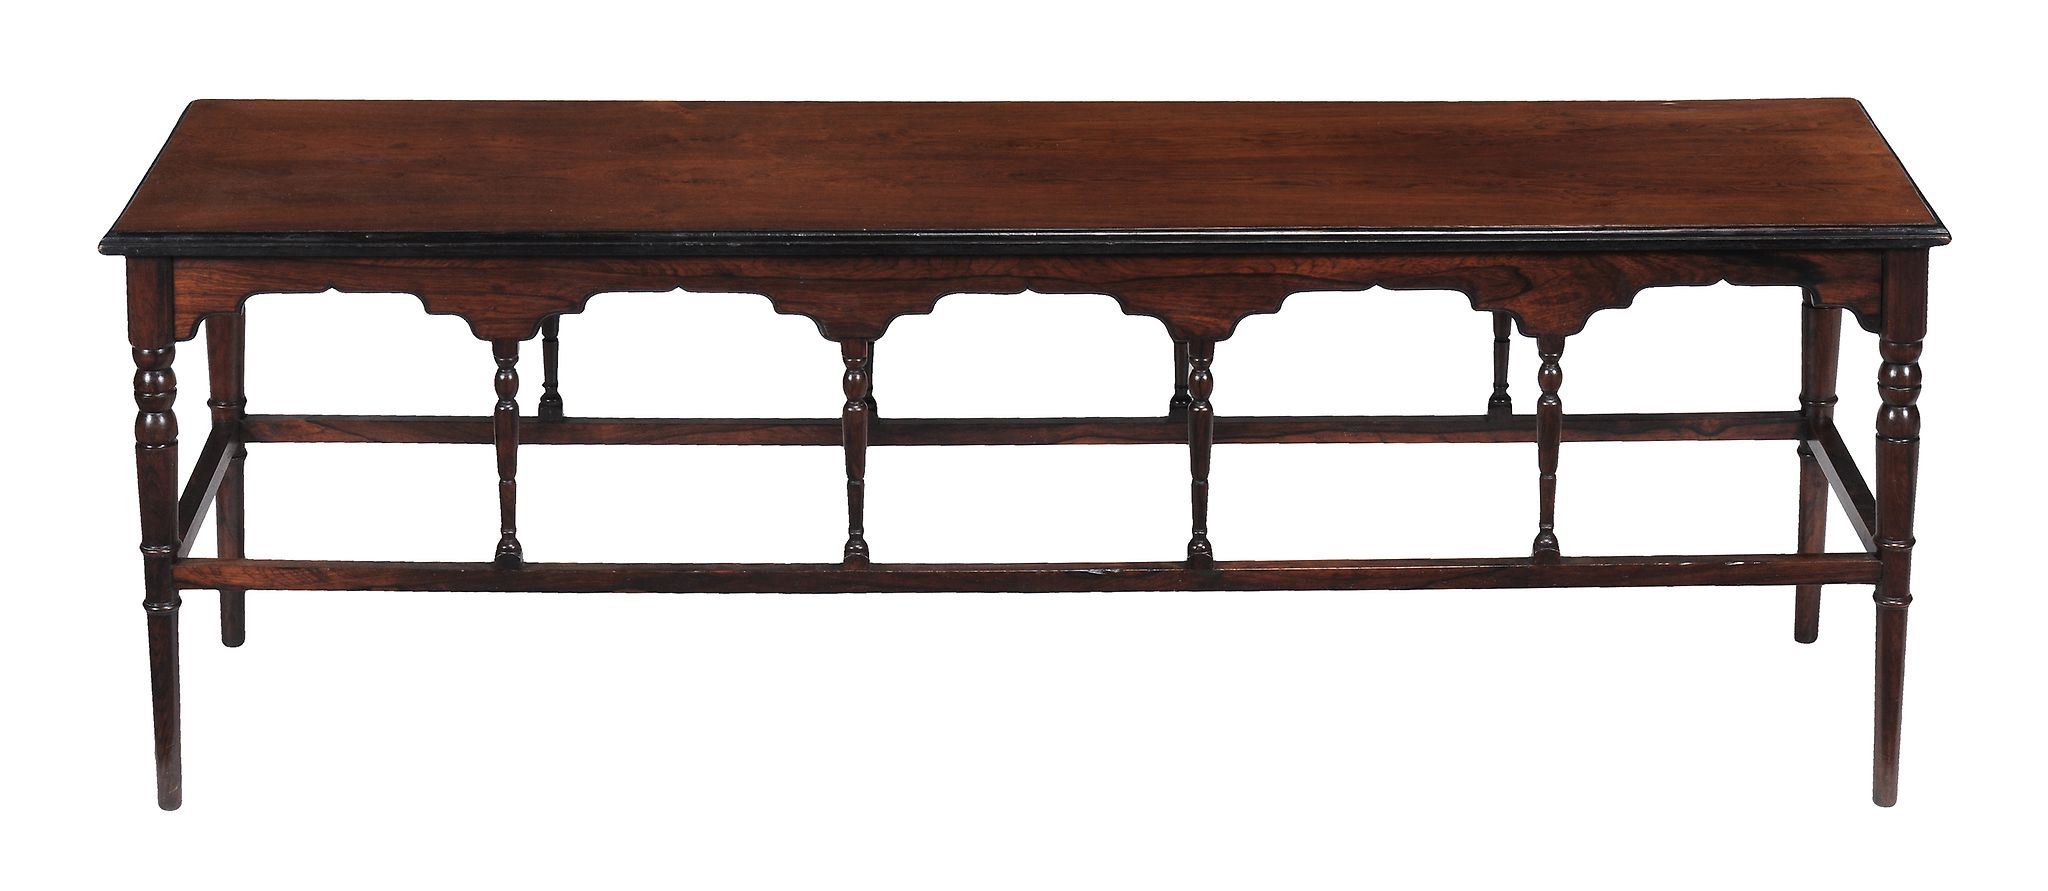 An Aesthetic rosewood and ebonised hall bench, late 19th century  An Aesthetic rosewood and ebonised